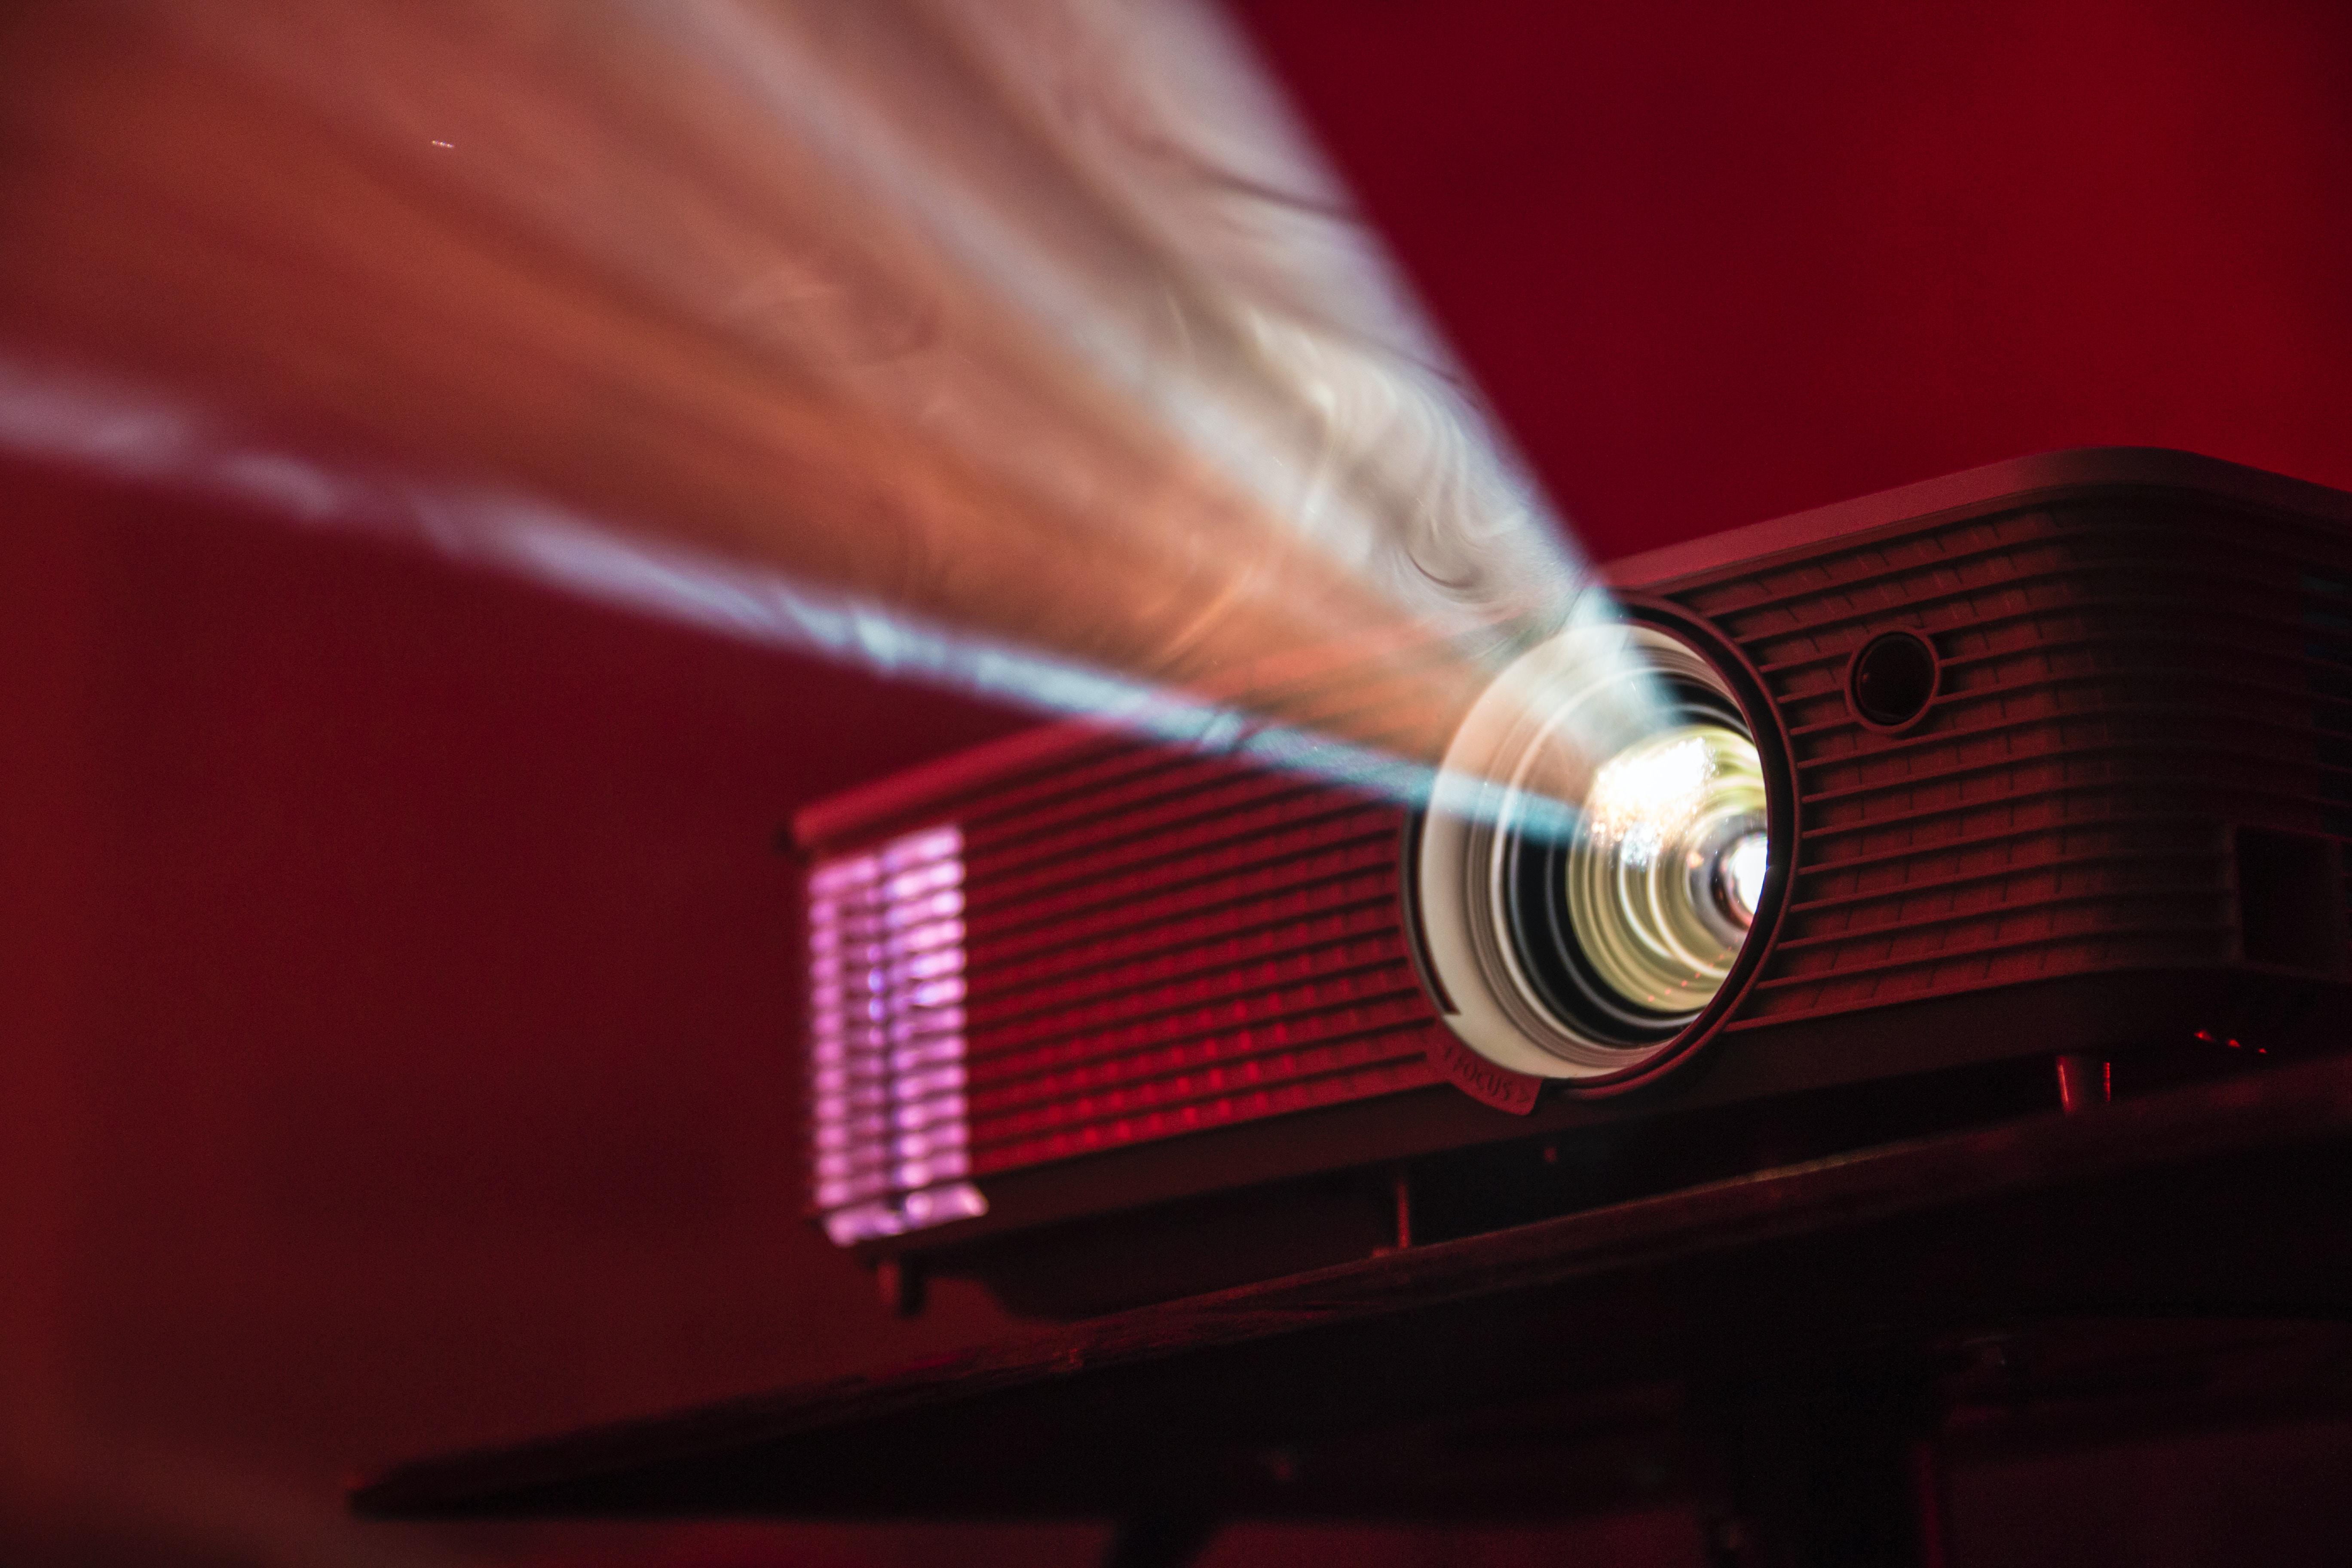 An up-close image of a projector in a dark red room